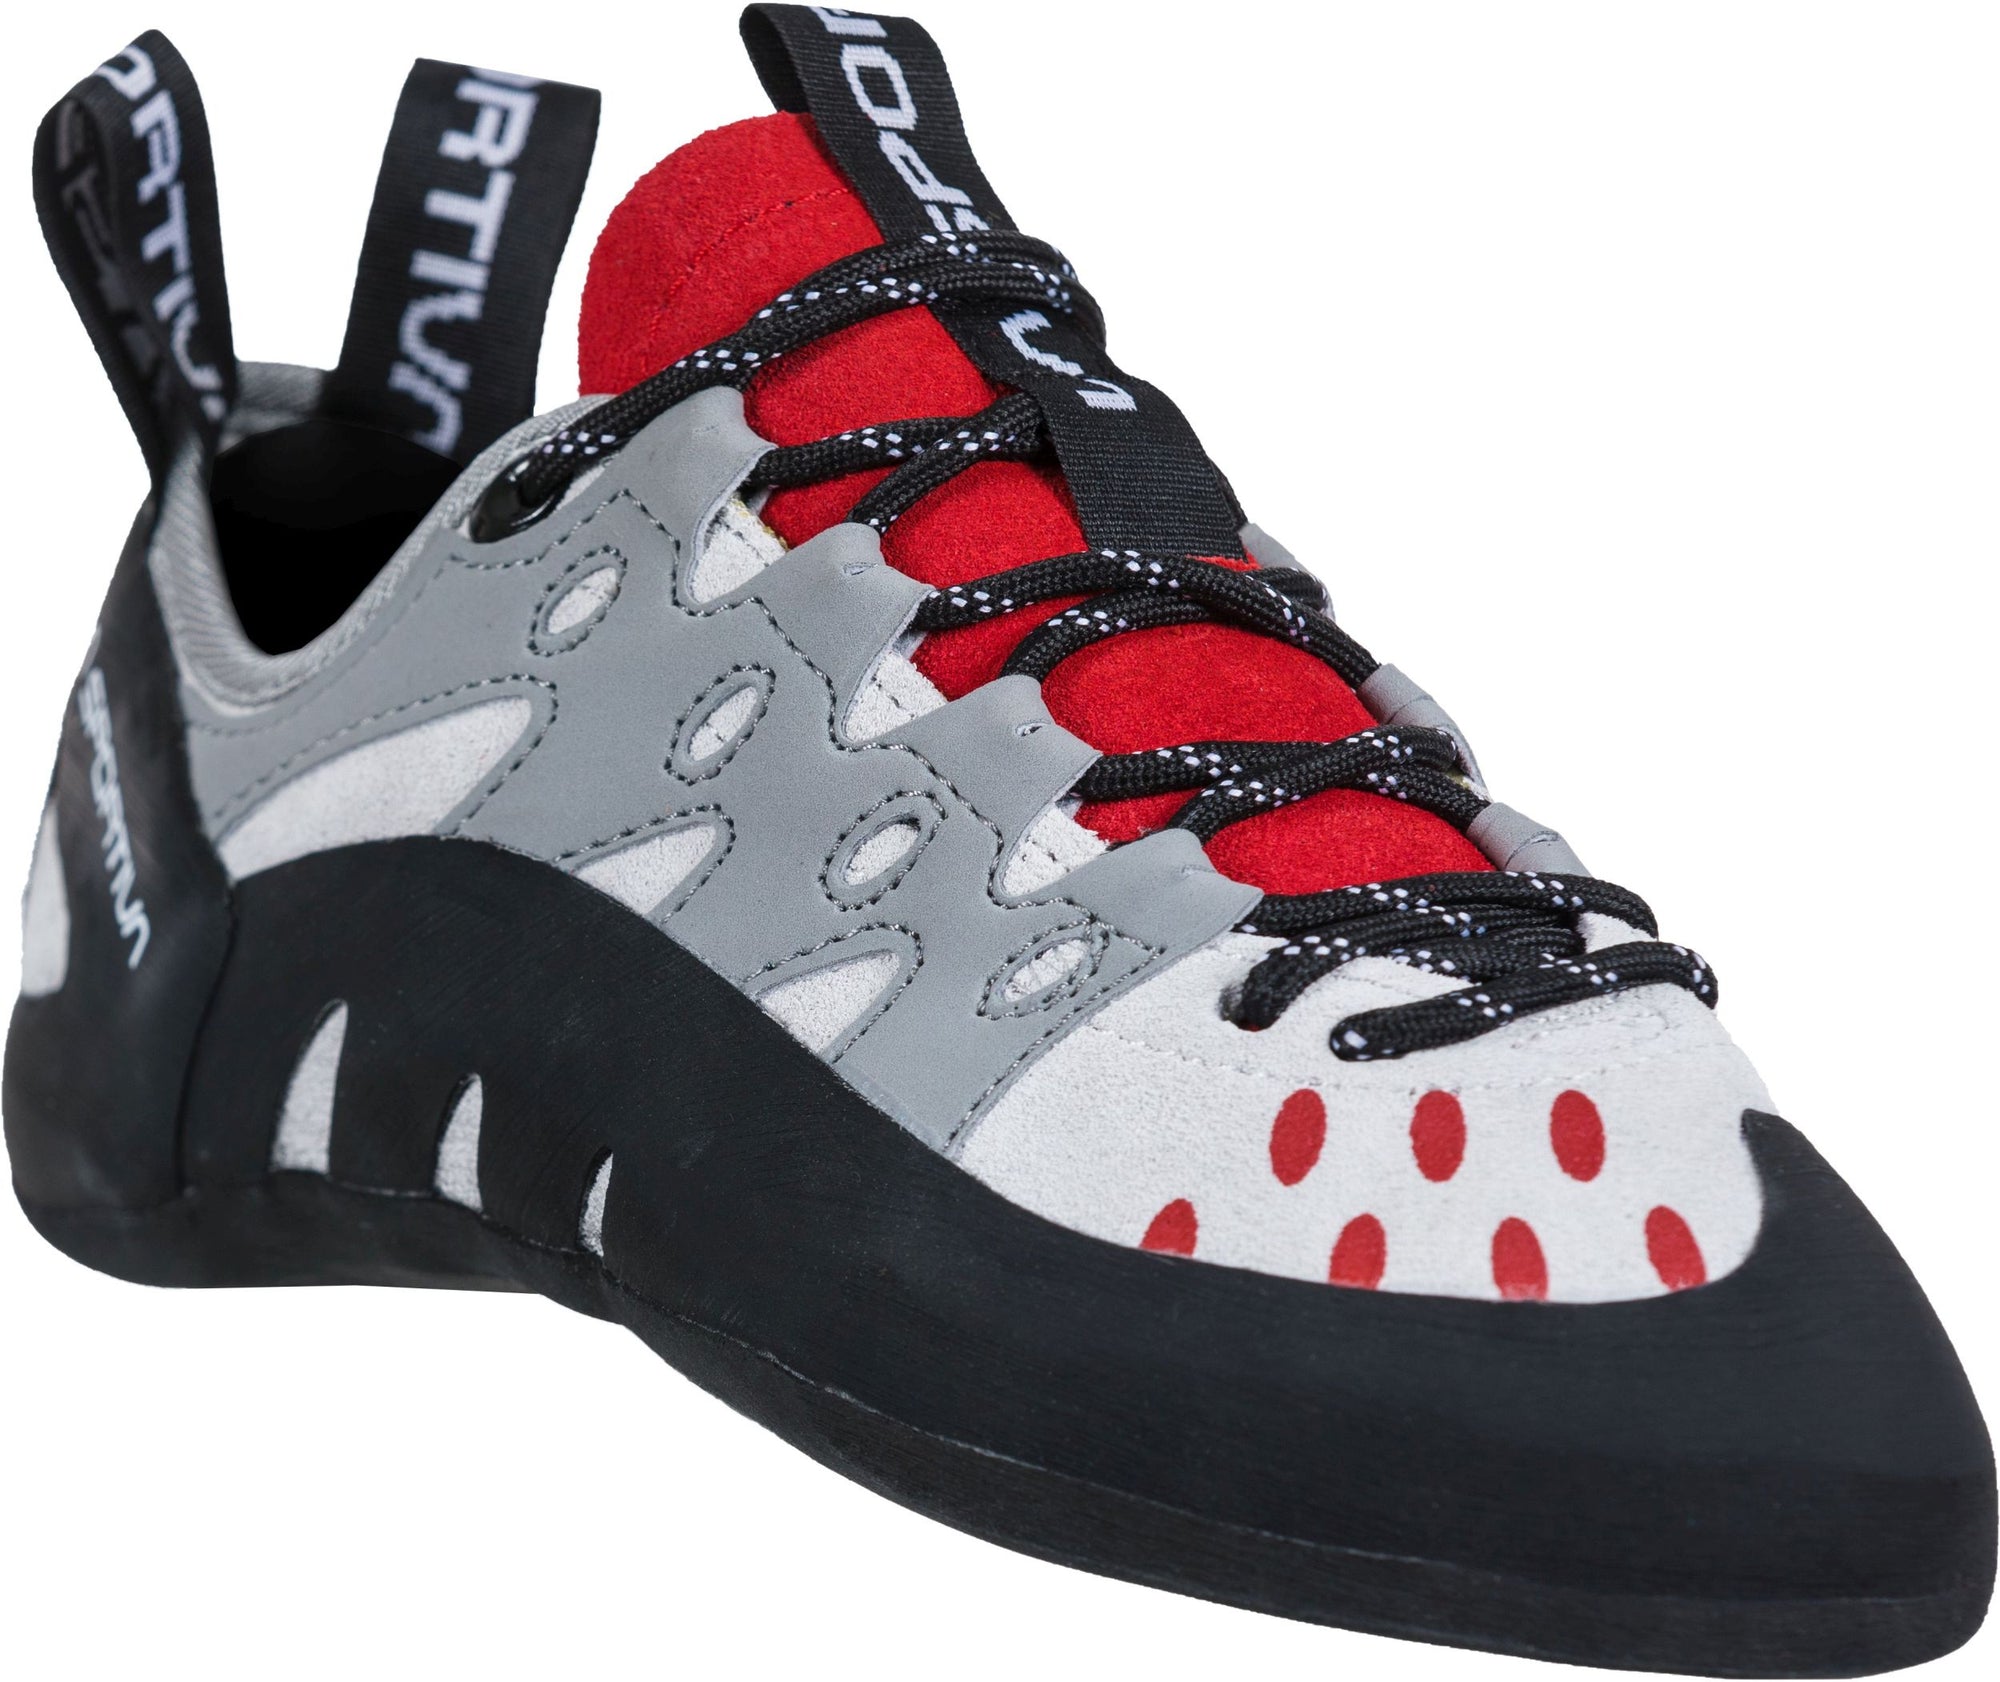 unlined climbing shoes